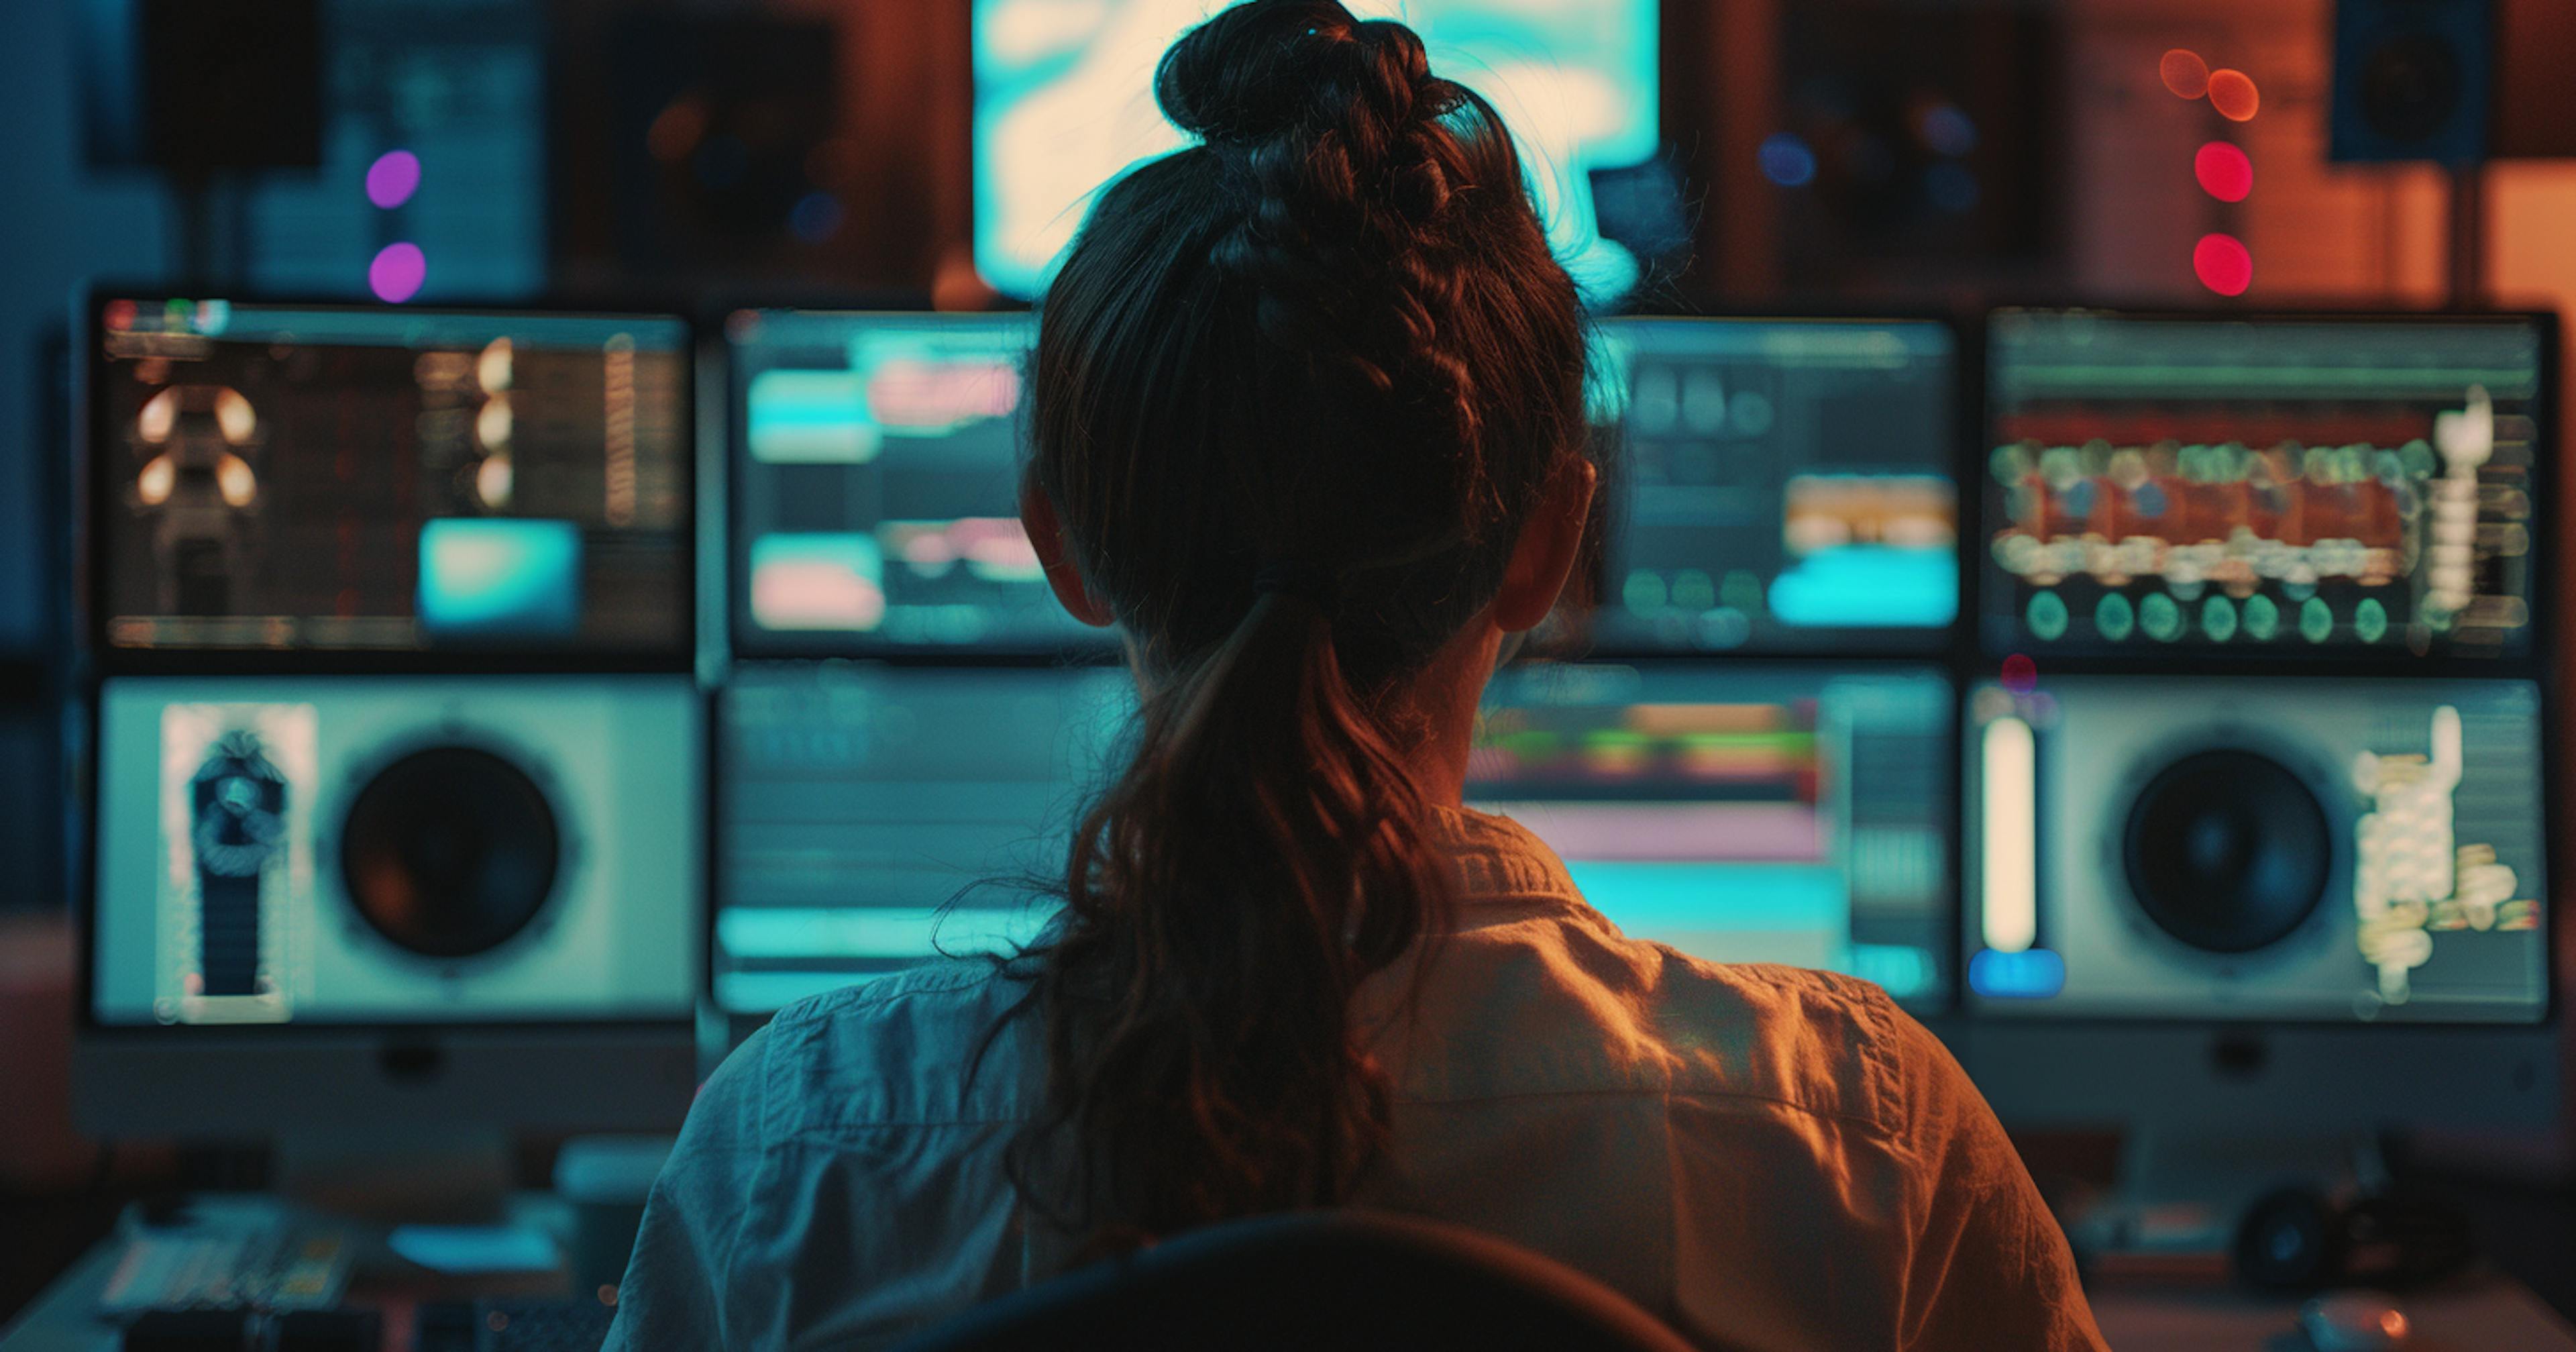 An image of a woman working in a media edit suite